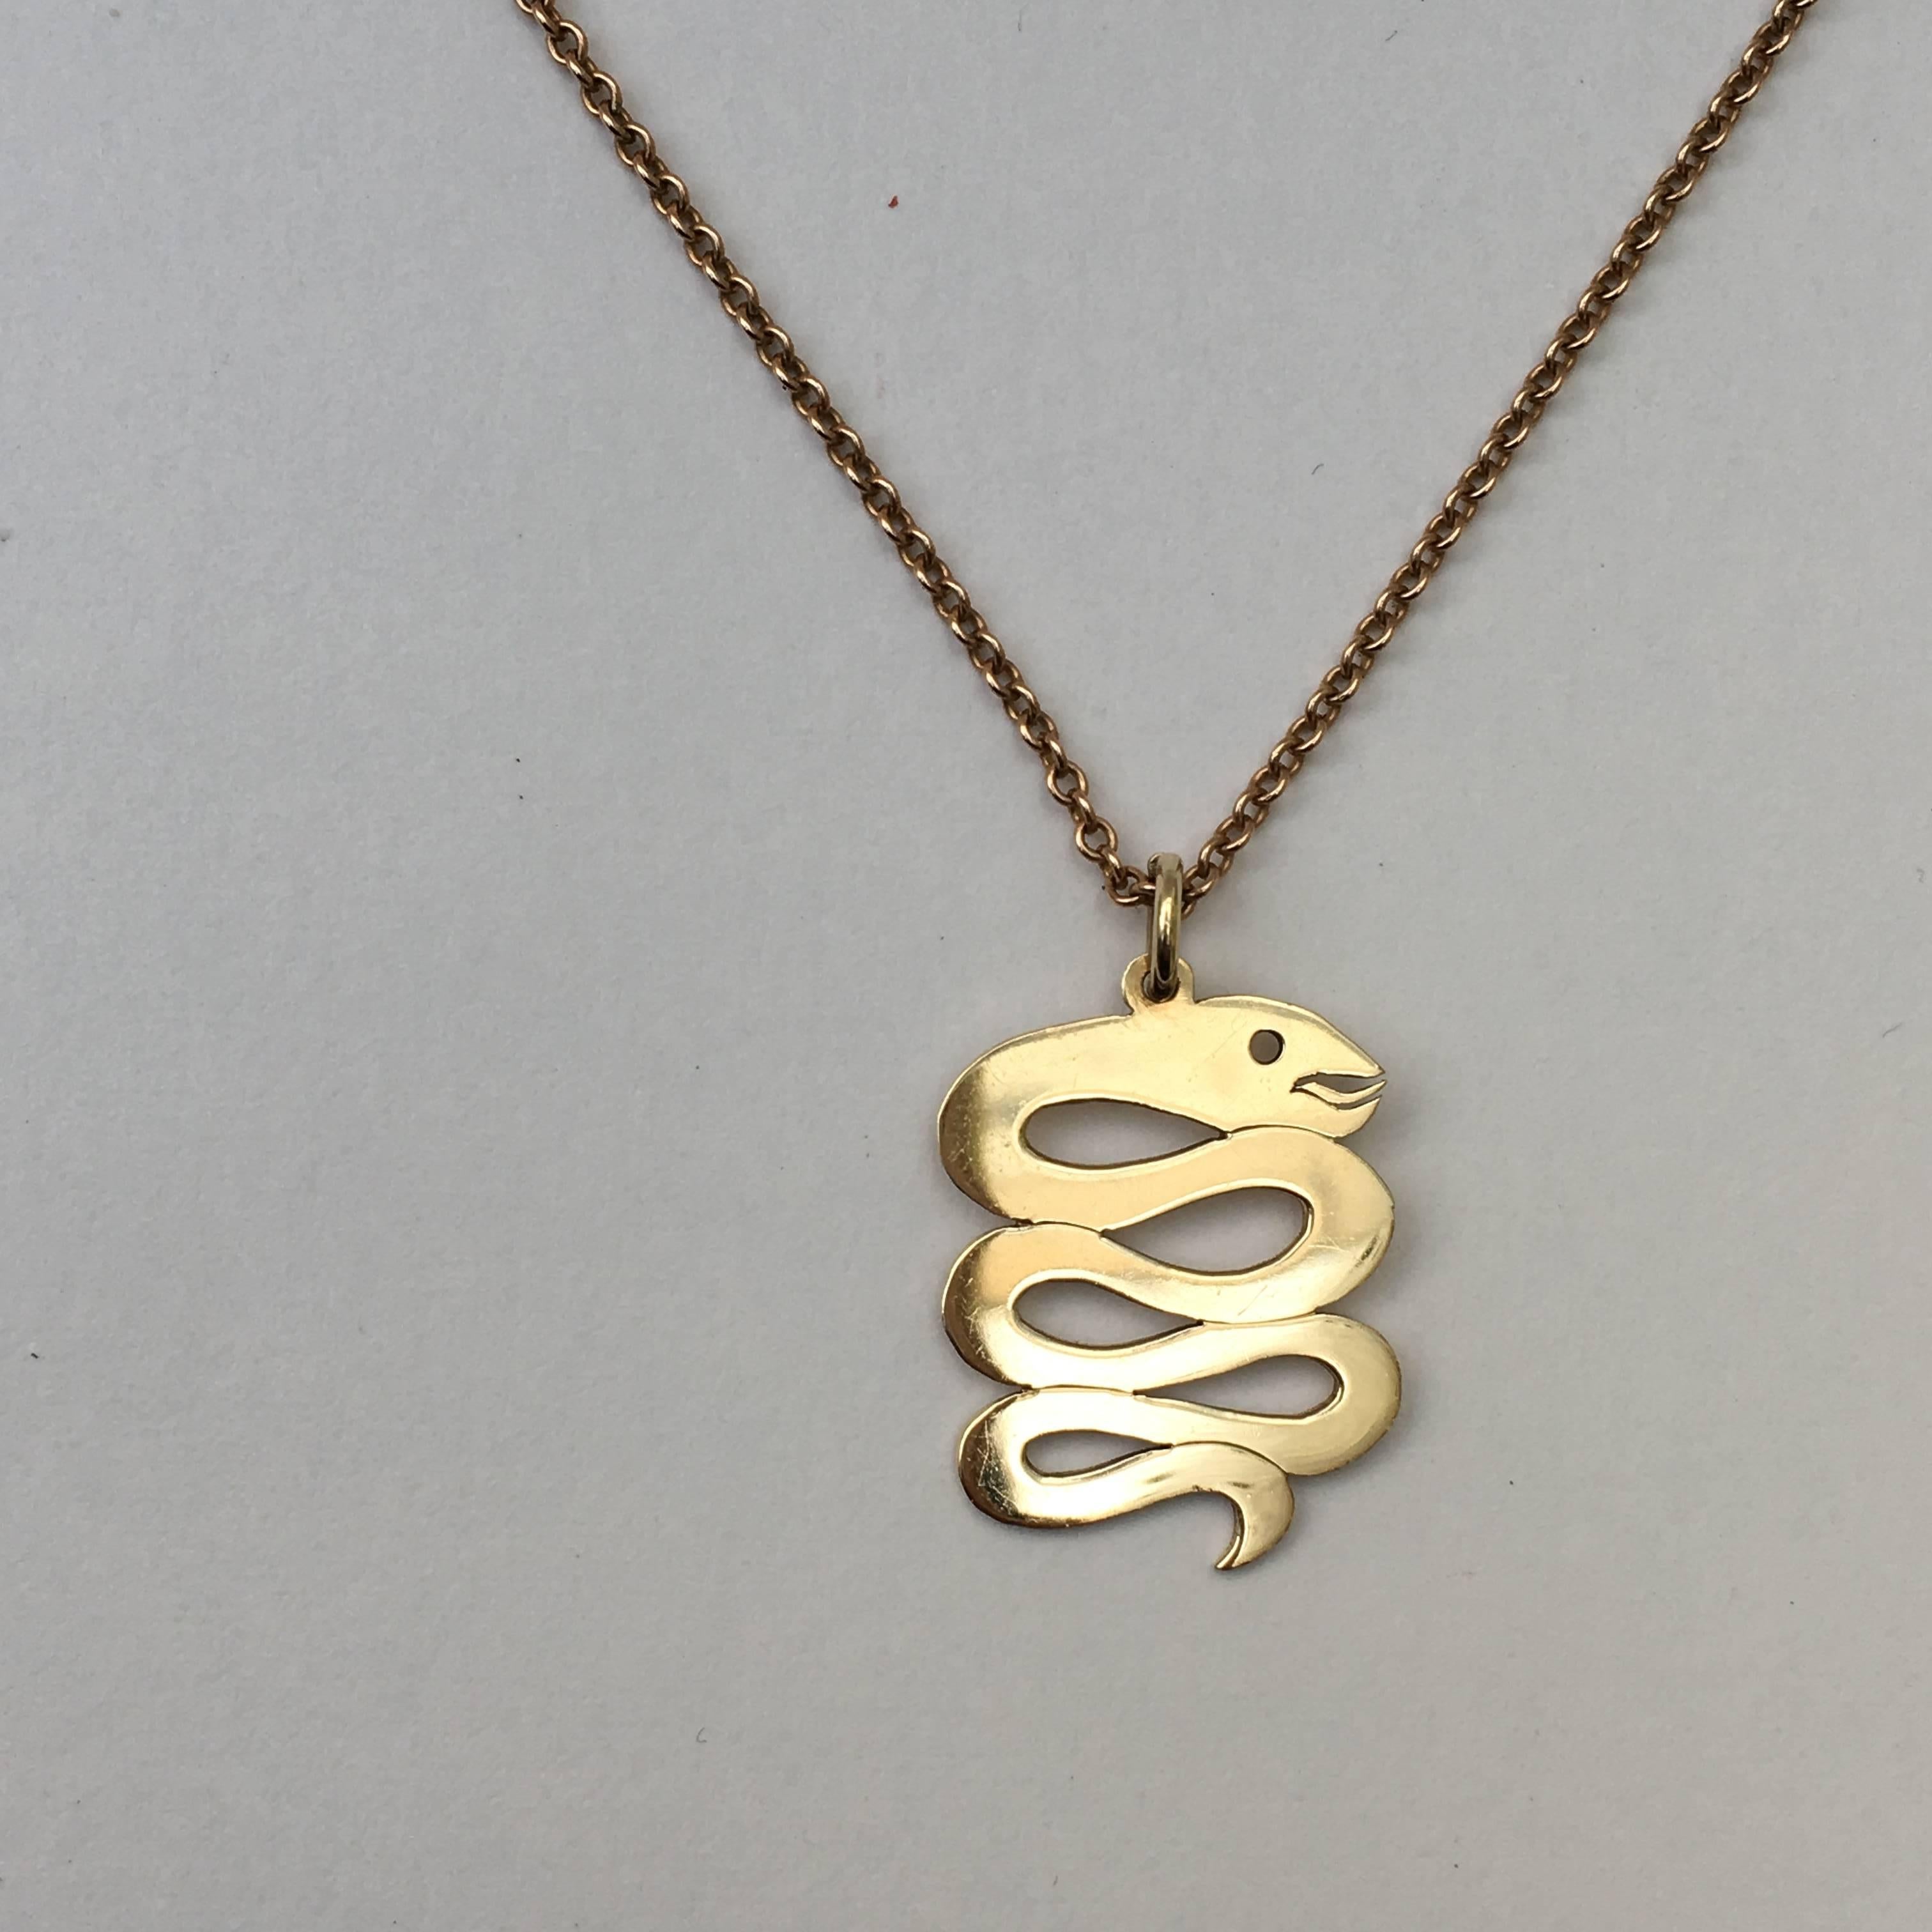 Snakes are revered in many cultures, thought to represent creativity, fertility and transformation. This 1970s 9ct gold snake pendant is full of character and would make a stylish addition to any charm collection. 

Size: 3cm x 1.8cm at widest